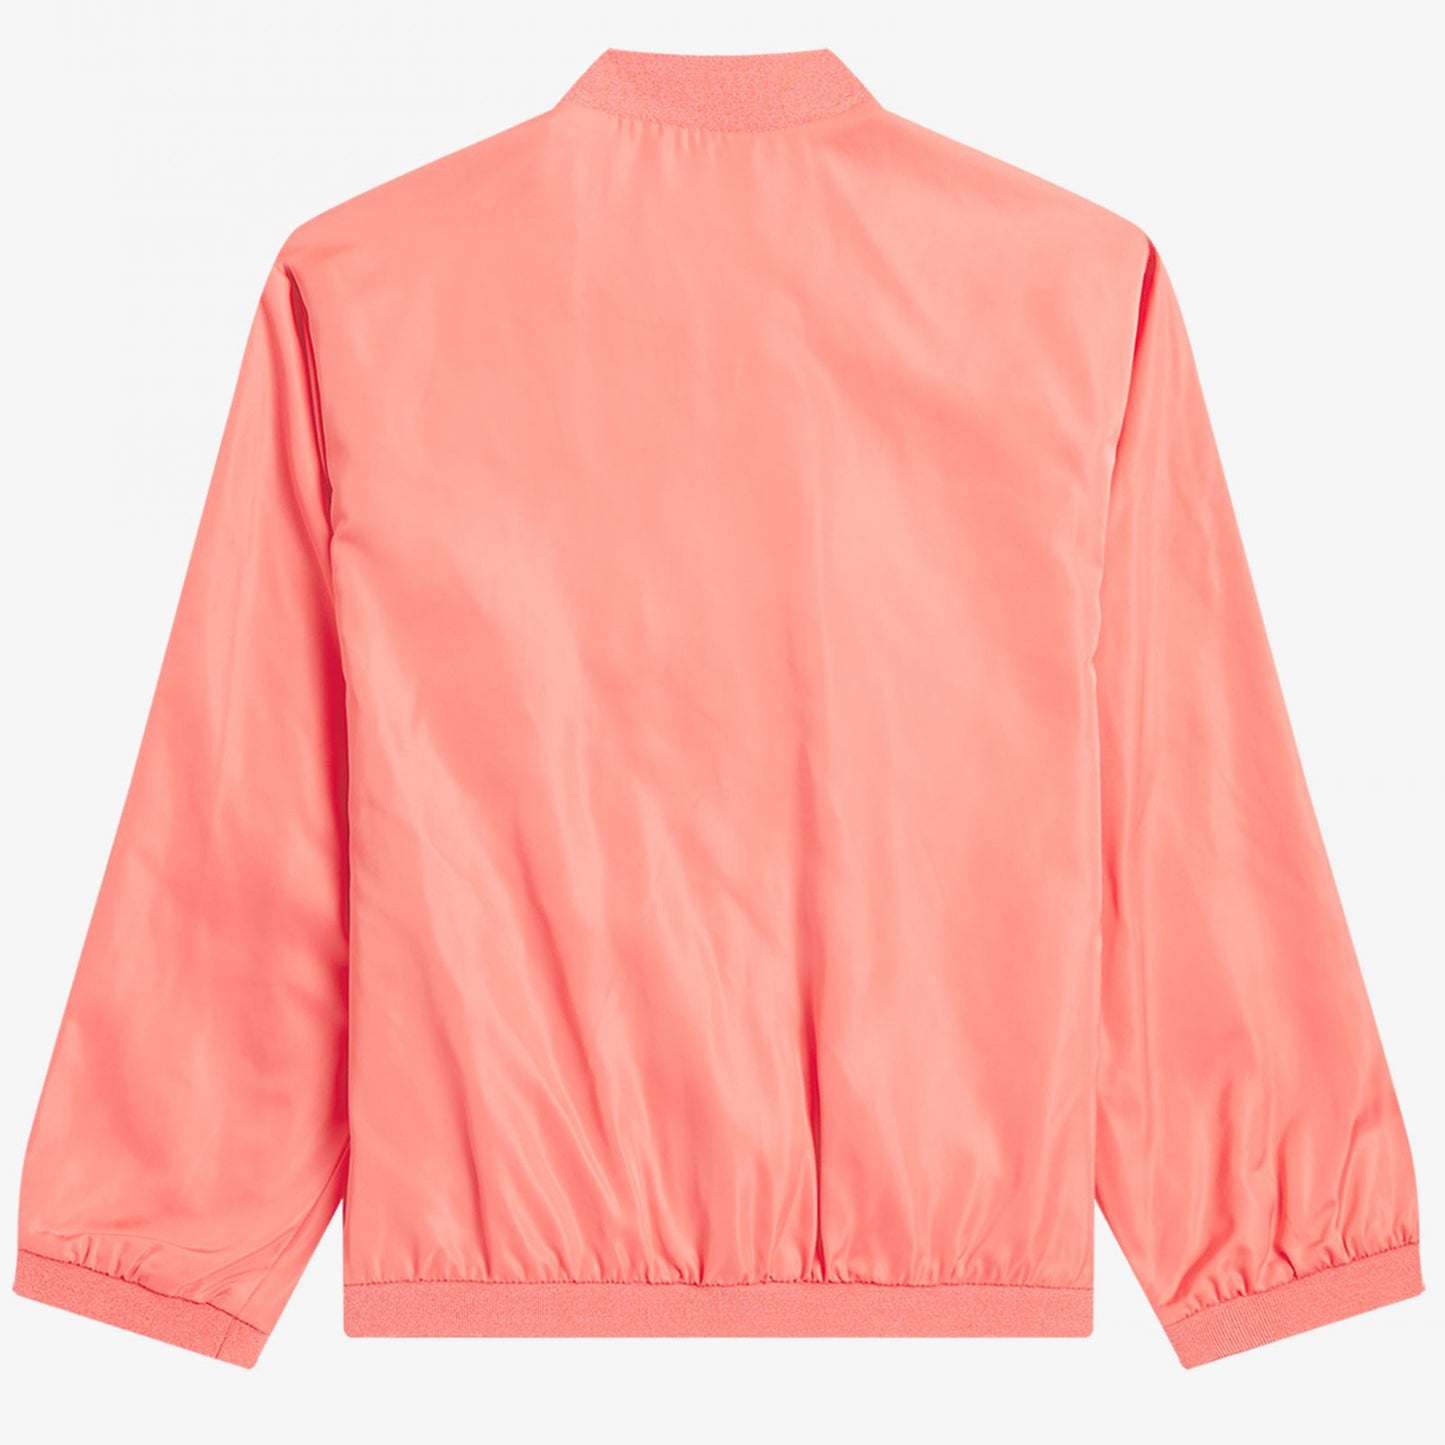 Fred Perry x Amy Winehouse Satin Bomber Jacket